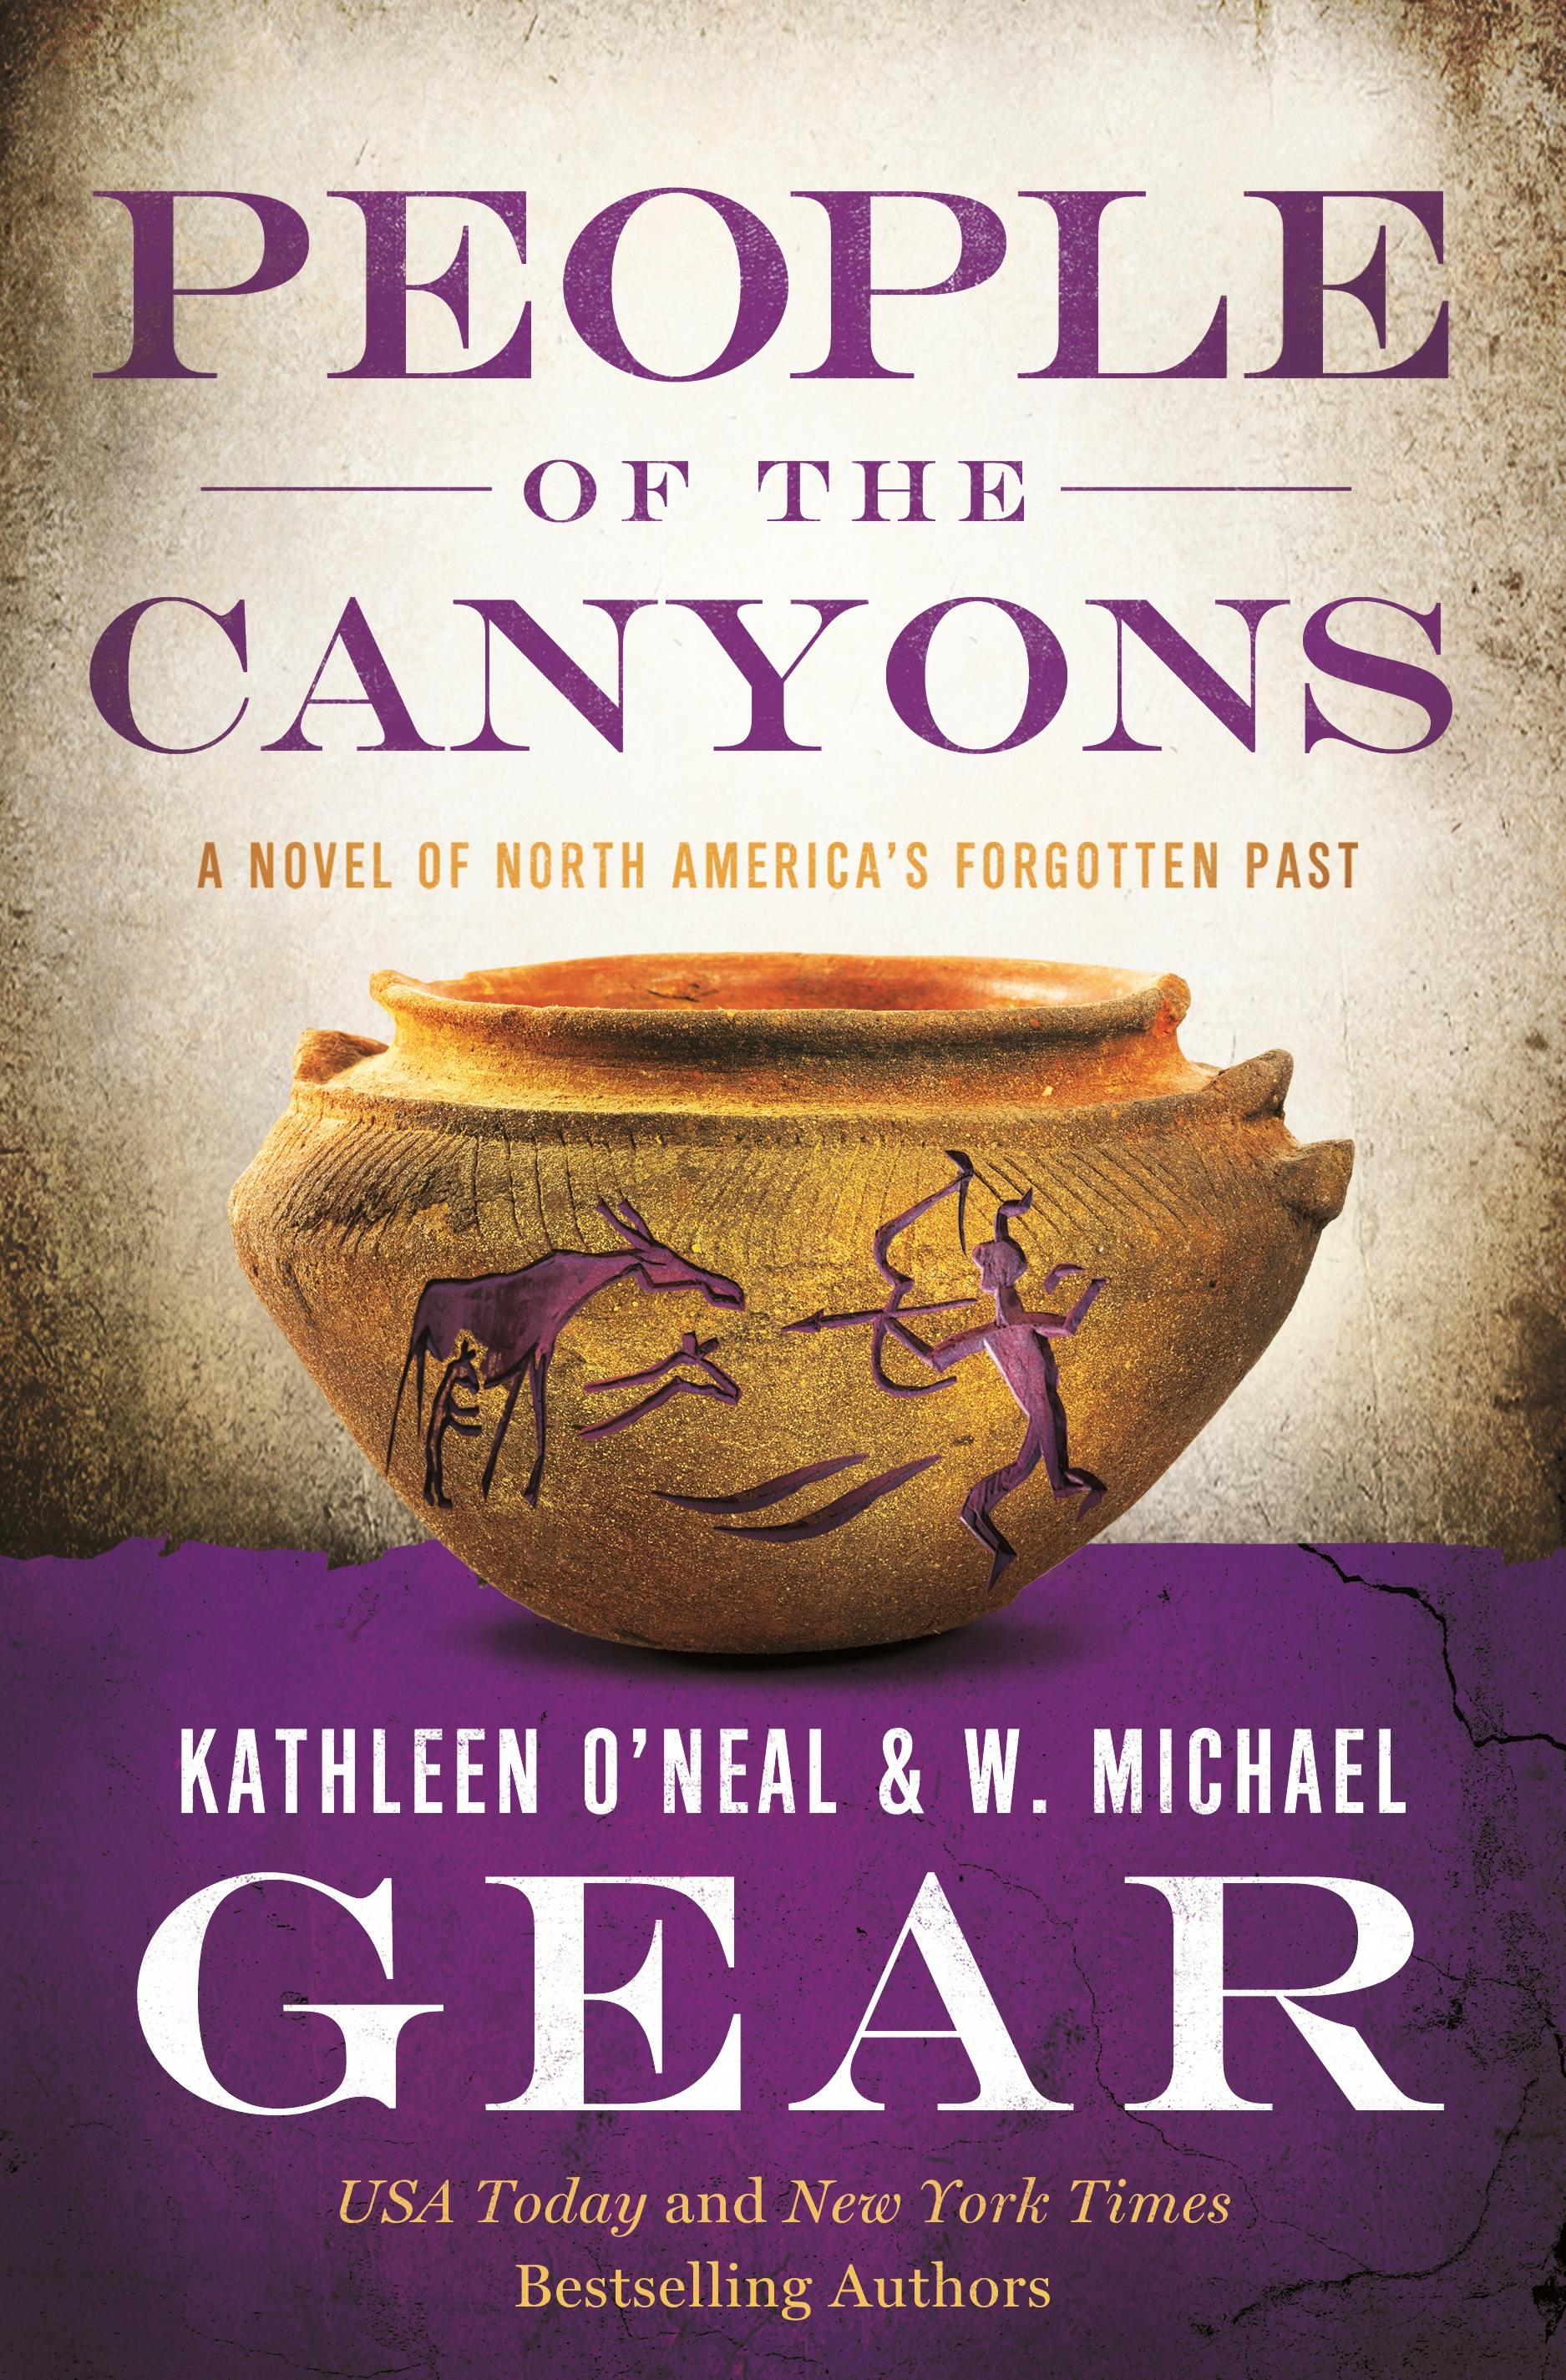 Image of People of the Canyons